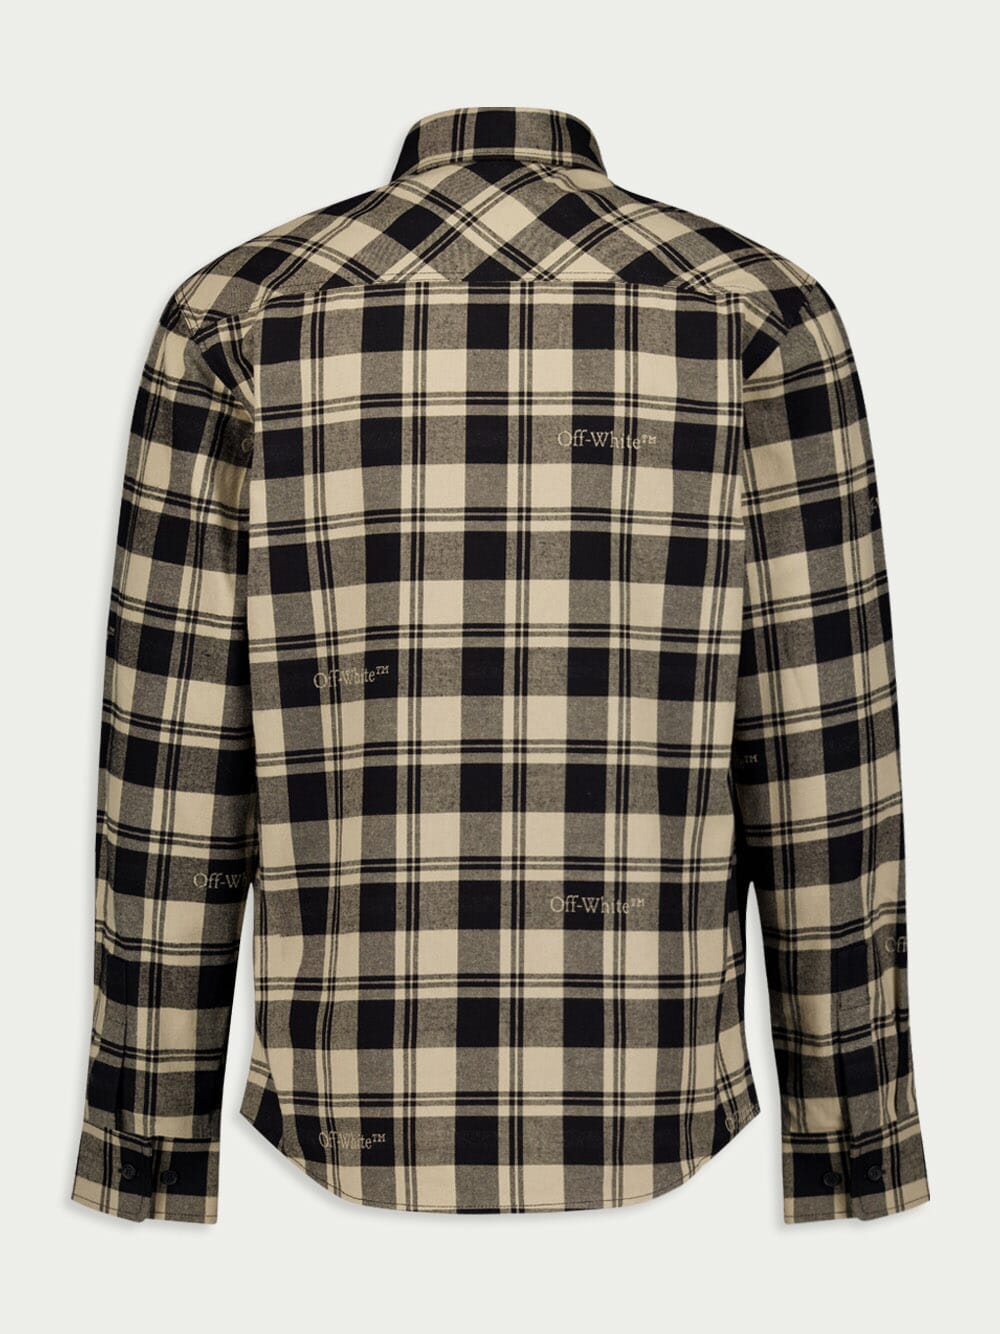 Off-WhiteCheck-Print Flannel Shirt at Fashion Clinic